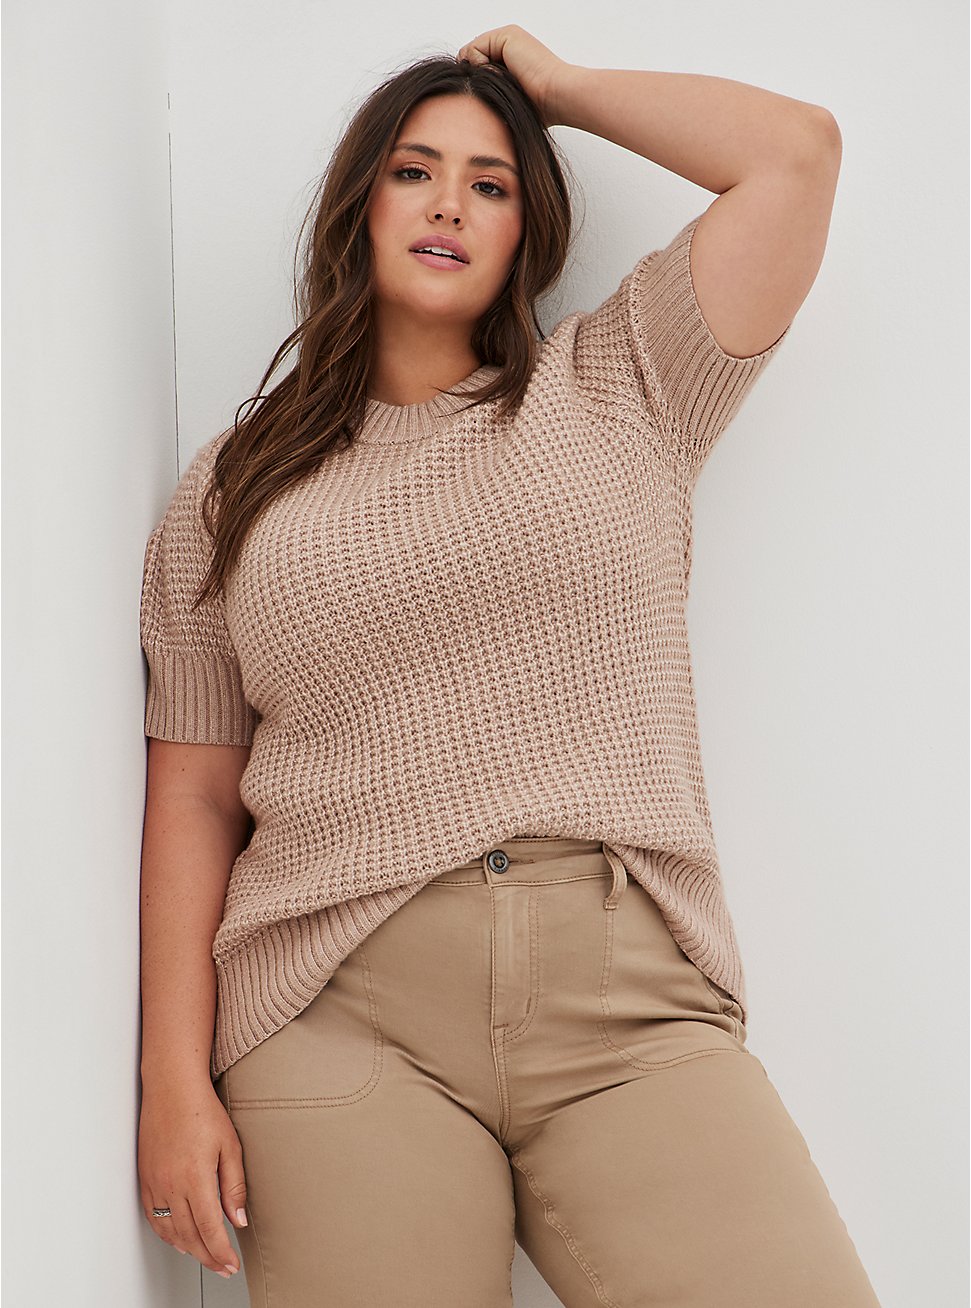 Chunky Drop Shoulder Pullover - Light Taupe, LIGHT TAUPE, hi-res